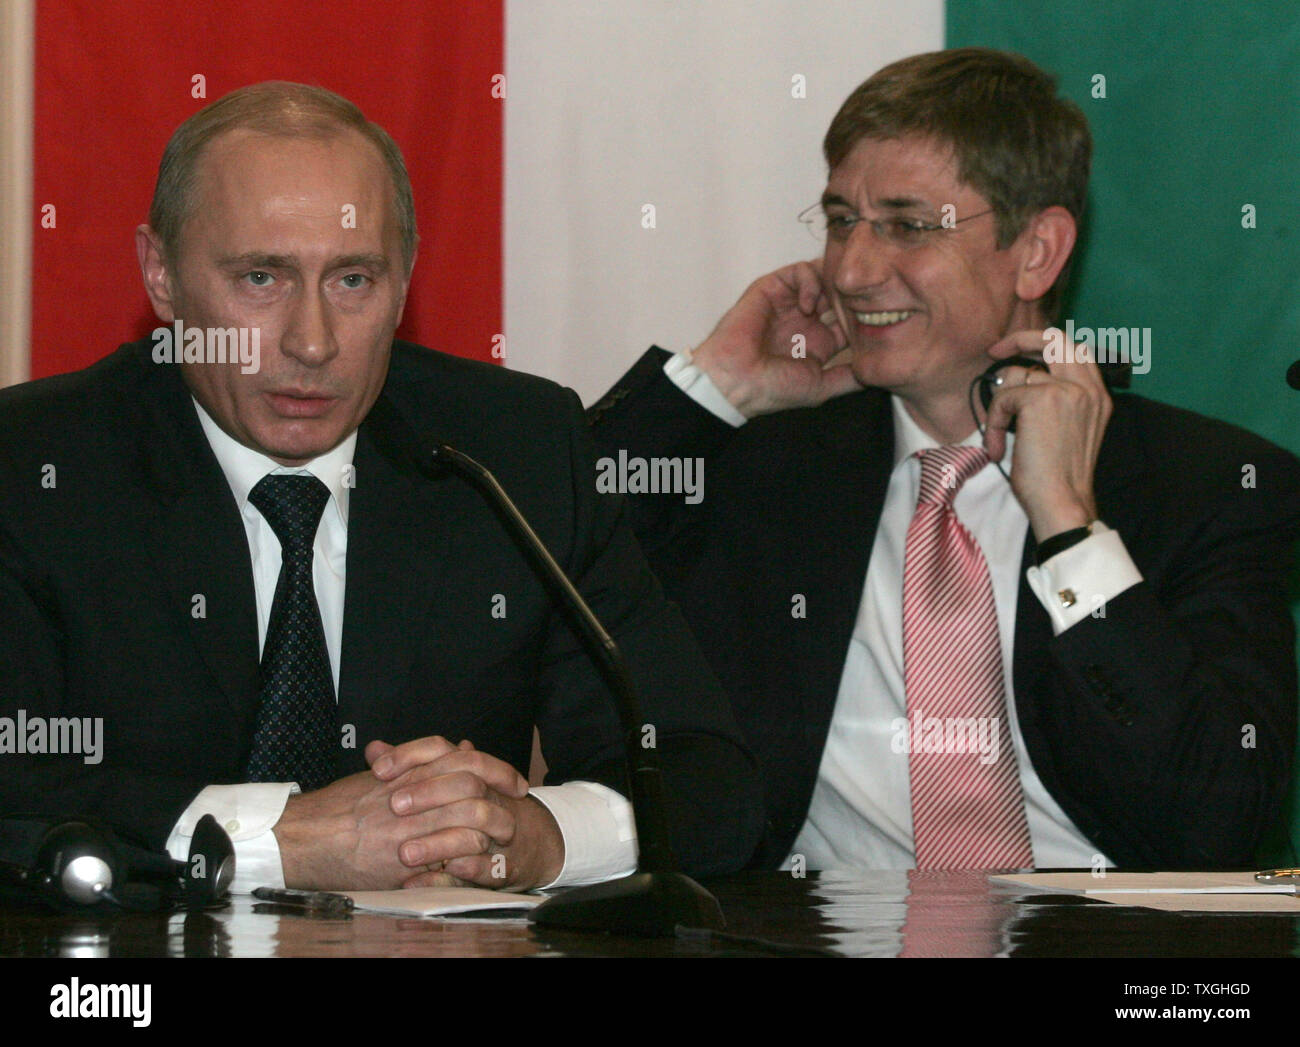 Russian President Vladimir Putin (L) and Hungarian Prime Minister Ferenc Gyurcsany attend a joint news conference after their meeting in Budapest, February 28, 2006. Putin visited Hungary to discuss economic and energy issues. (UPI Photo/Anatoli Zhdanov) Stock Photo